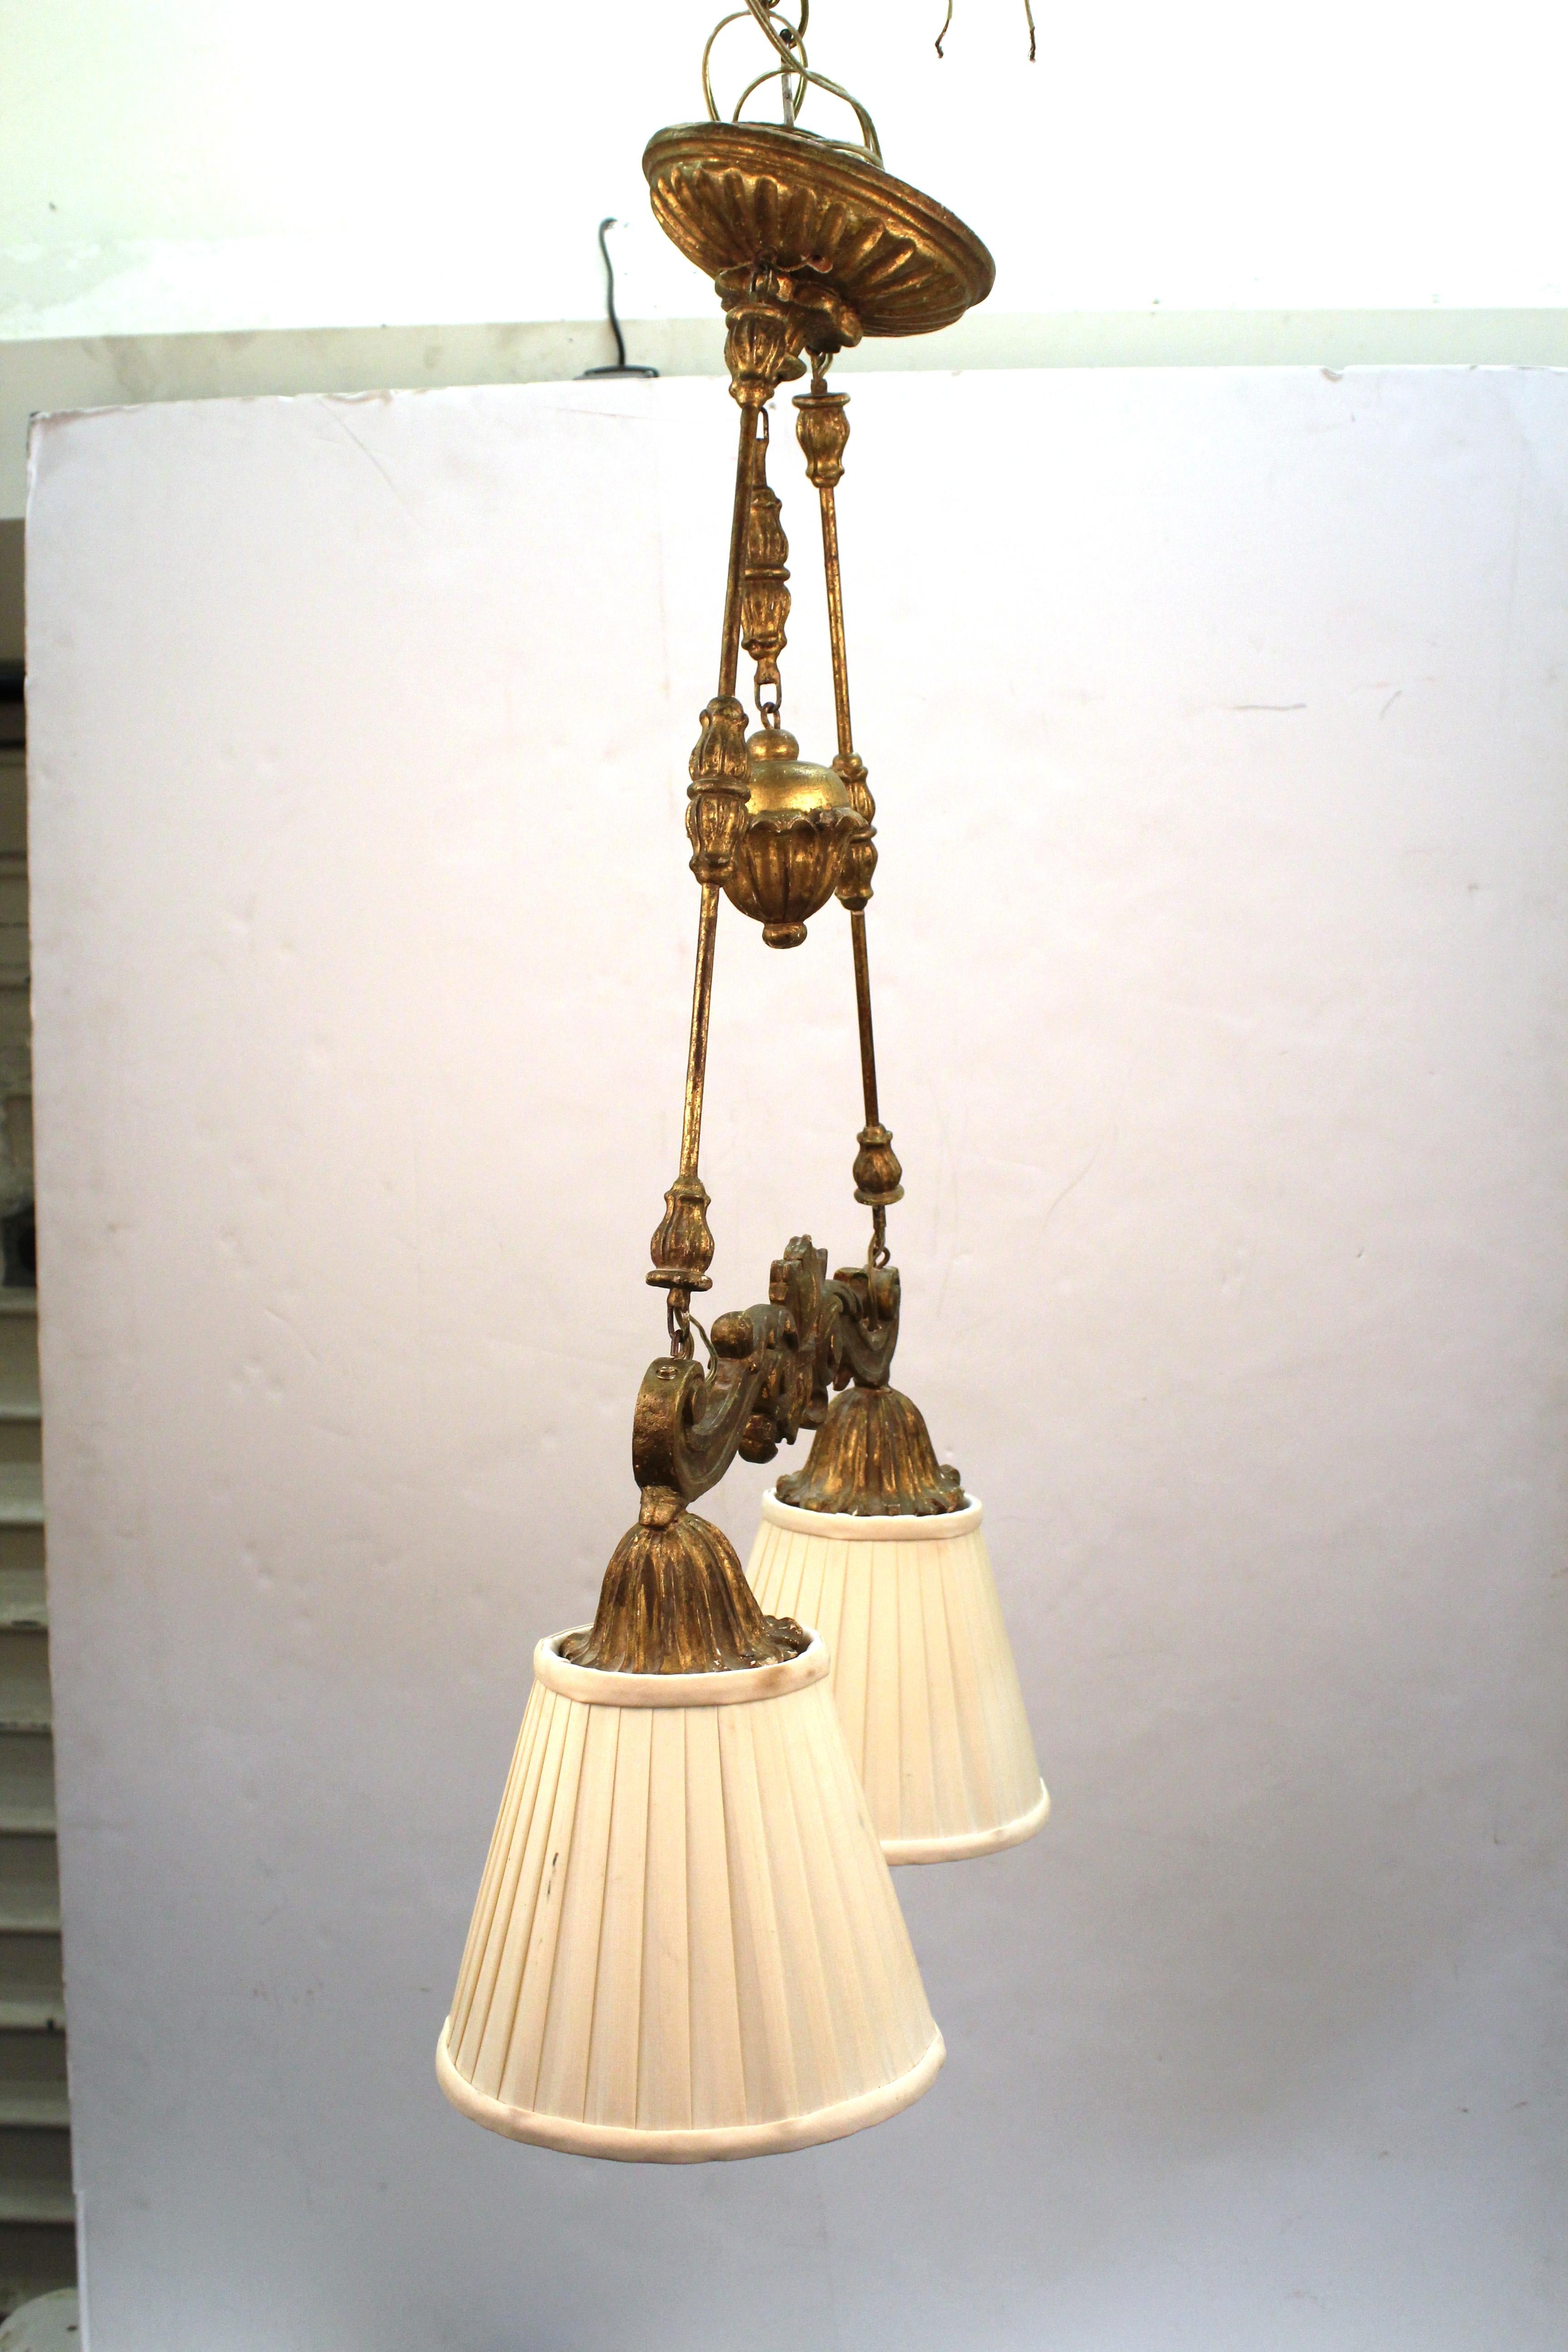 Neoclassical Revival Gilt Wood Pendant Light In Good Condition For Sale In New York, NY